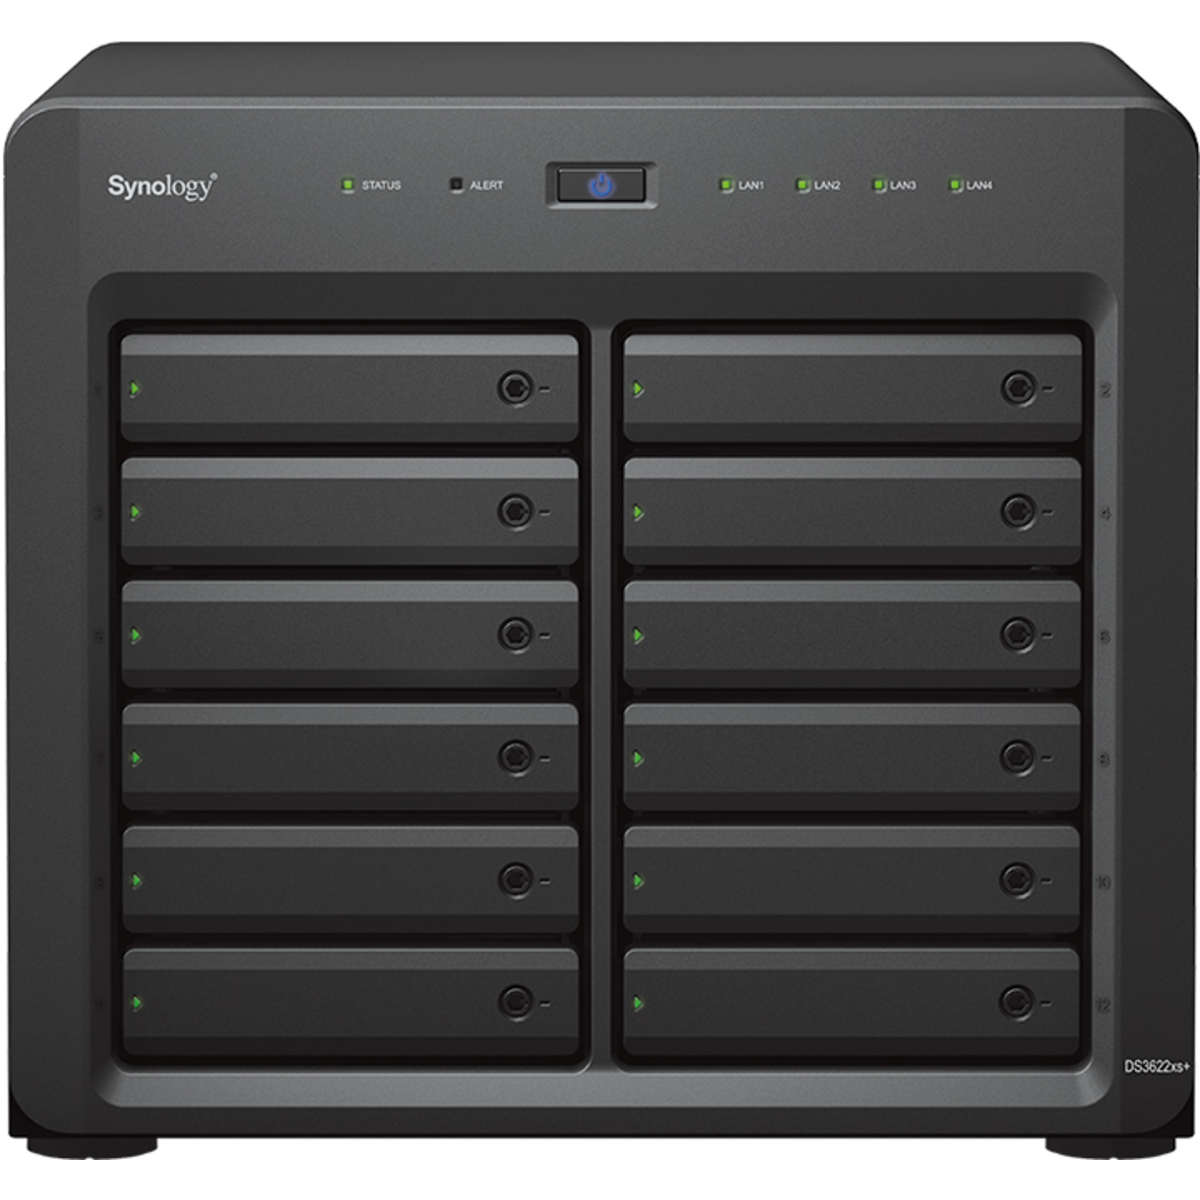 Synology DiskStation DS3622xs+ 240tb 12-Bay Desktop Multimedia / Power User / Business NAS - Network Attached Storage Device 10x24tb Western Digital Gold WD241KRYZ 3.5 7200rpm SATA 6Gb/s HDD ENTERPRISE Class Drives Installed - Burn-In Tested DiskStation DS3622xs+